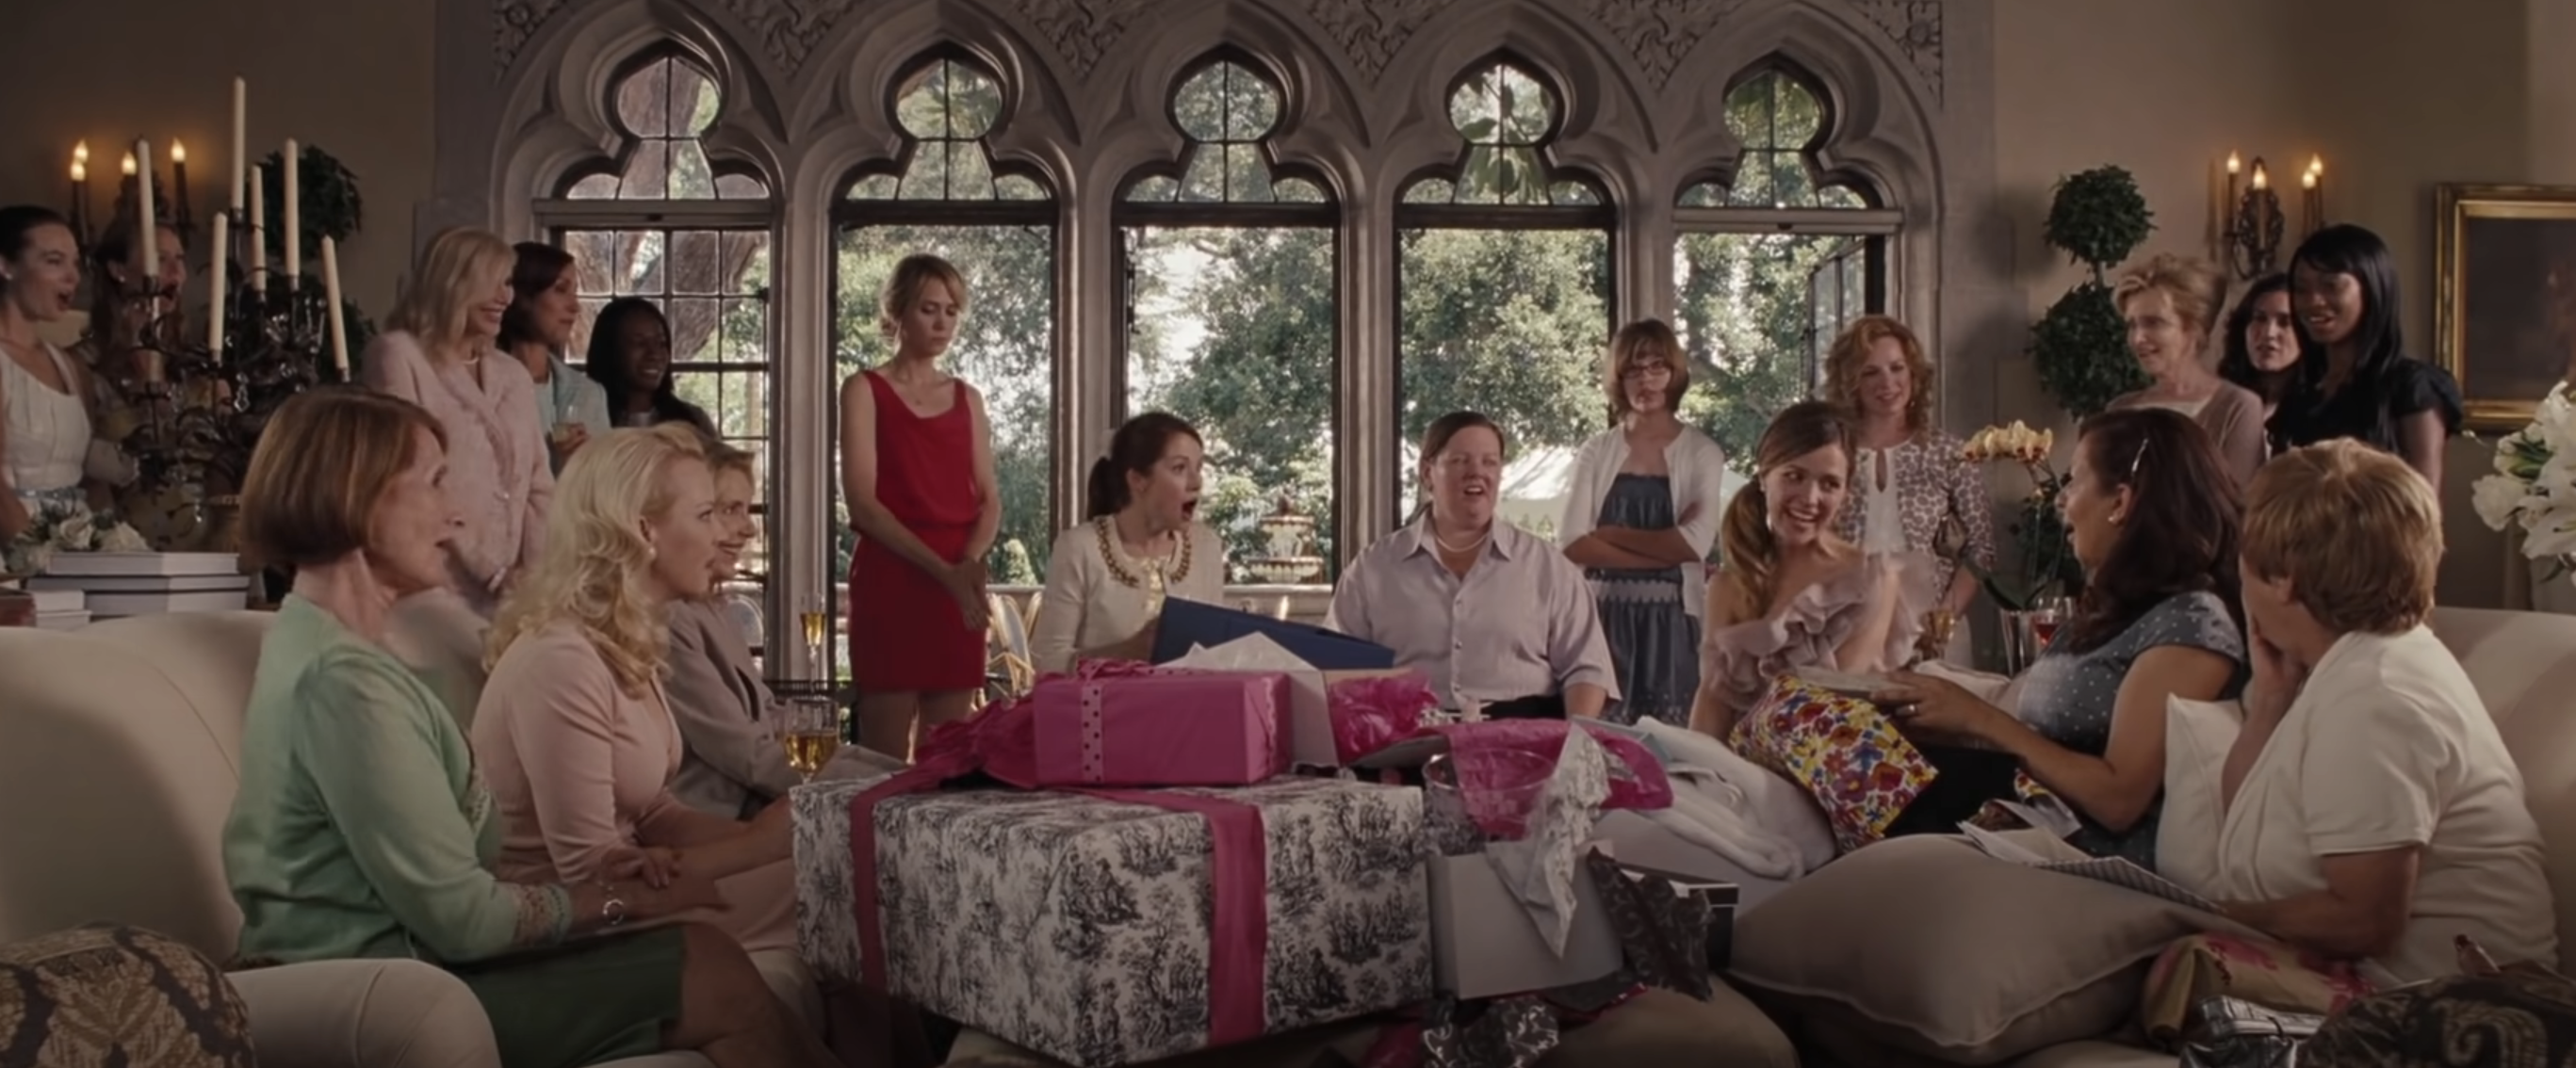 Group of women sitting in a room with presents, from the film &quot;Bridesmaids&quot;